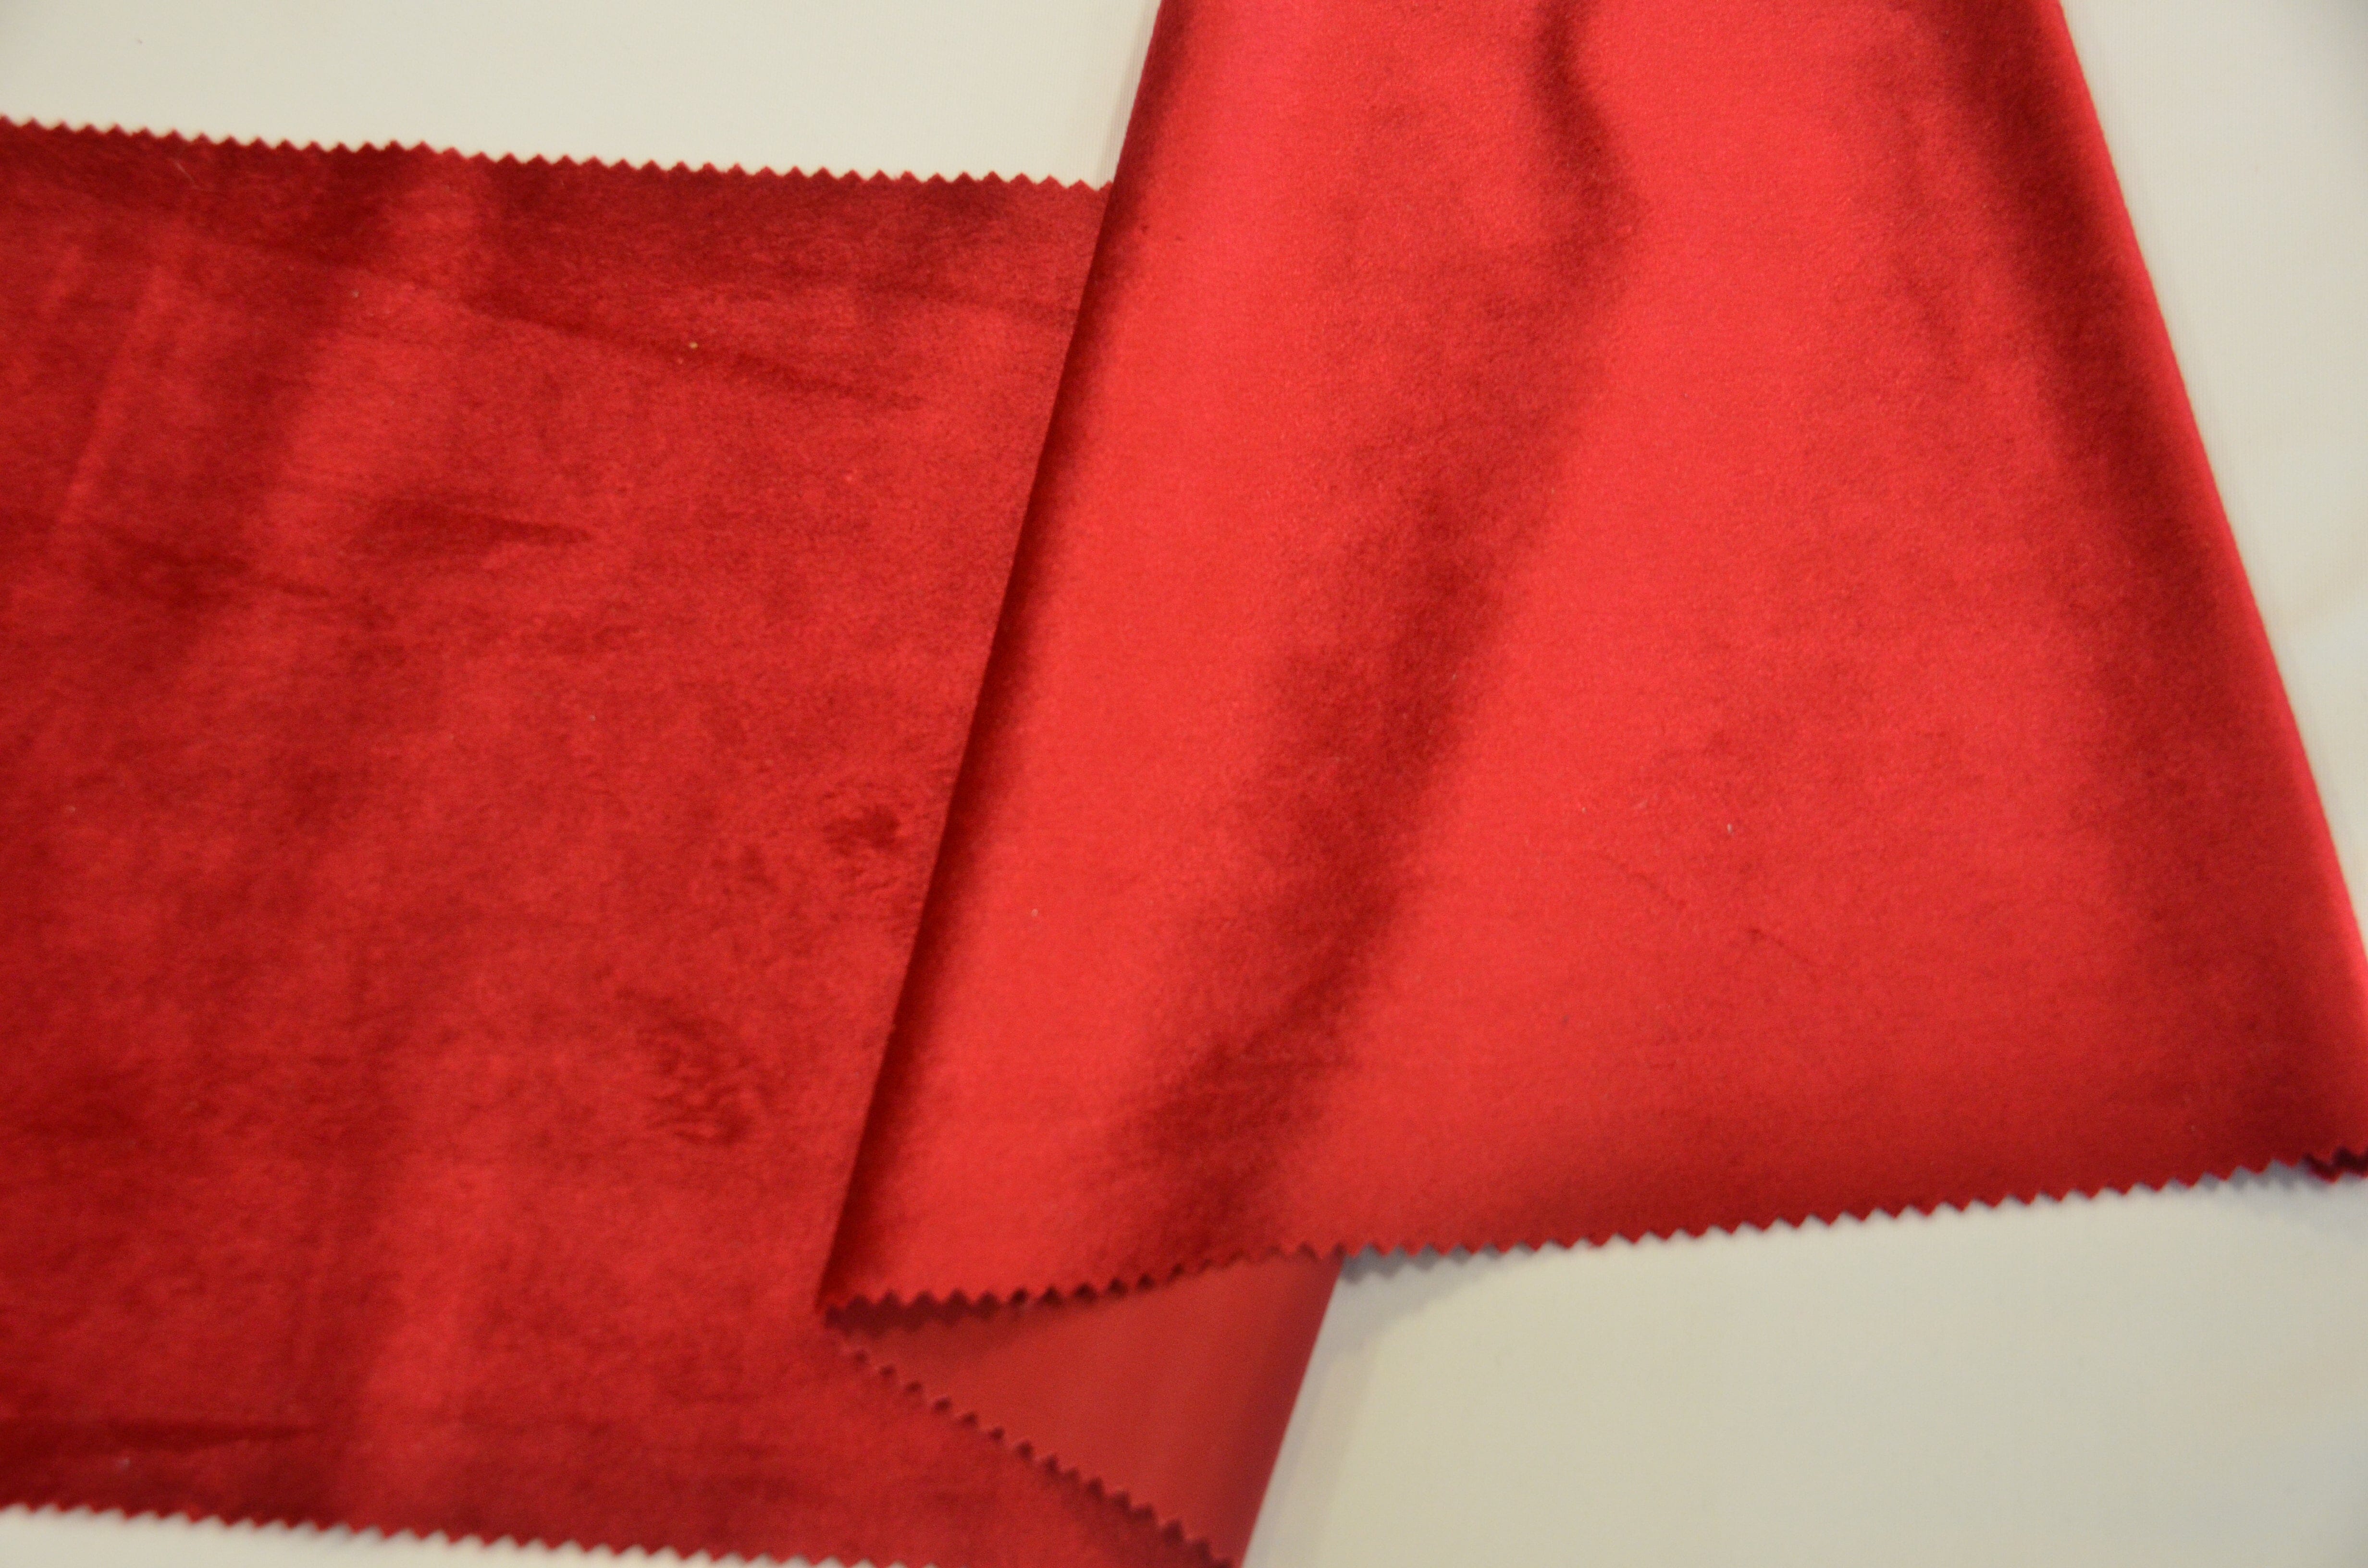 Velvet Fabric, 100% Polyester,Stretch, 58 Inches Wide, Over 100 Yards in  Stock - 1 Yard - Multiple Colors Available